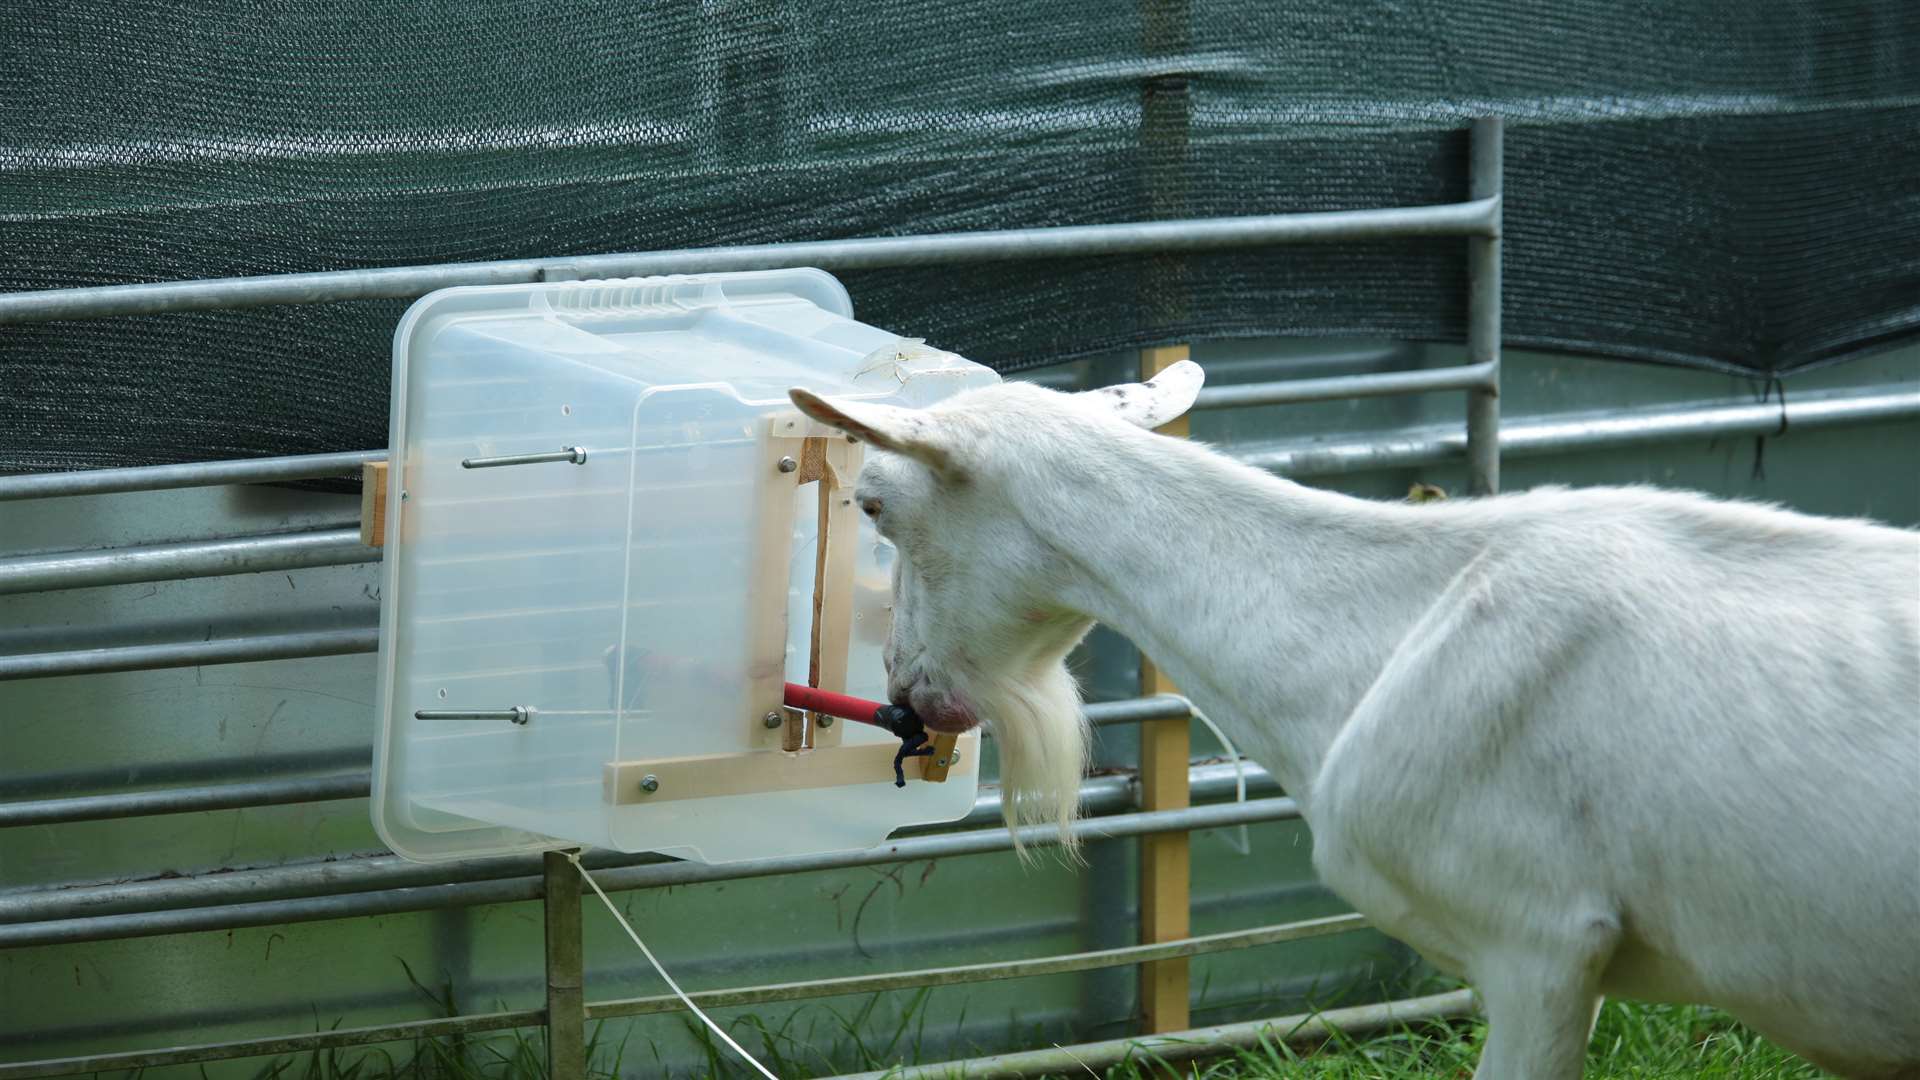 In previous experiments goats were made to perform a variety of tests